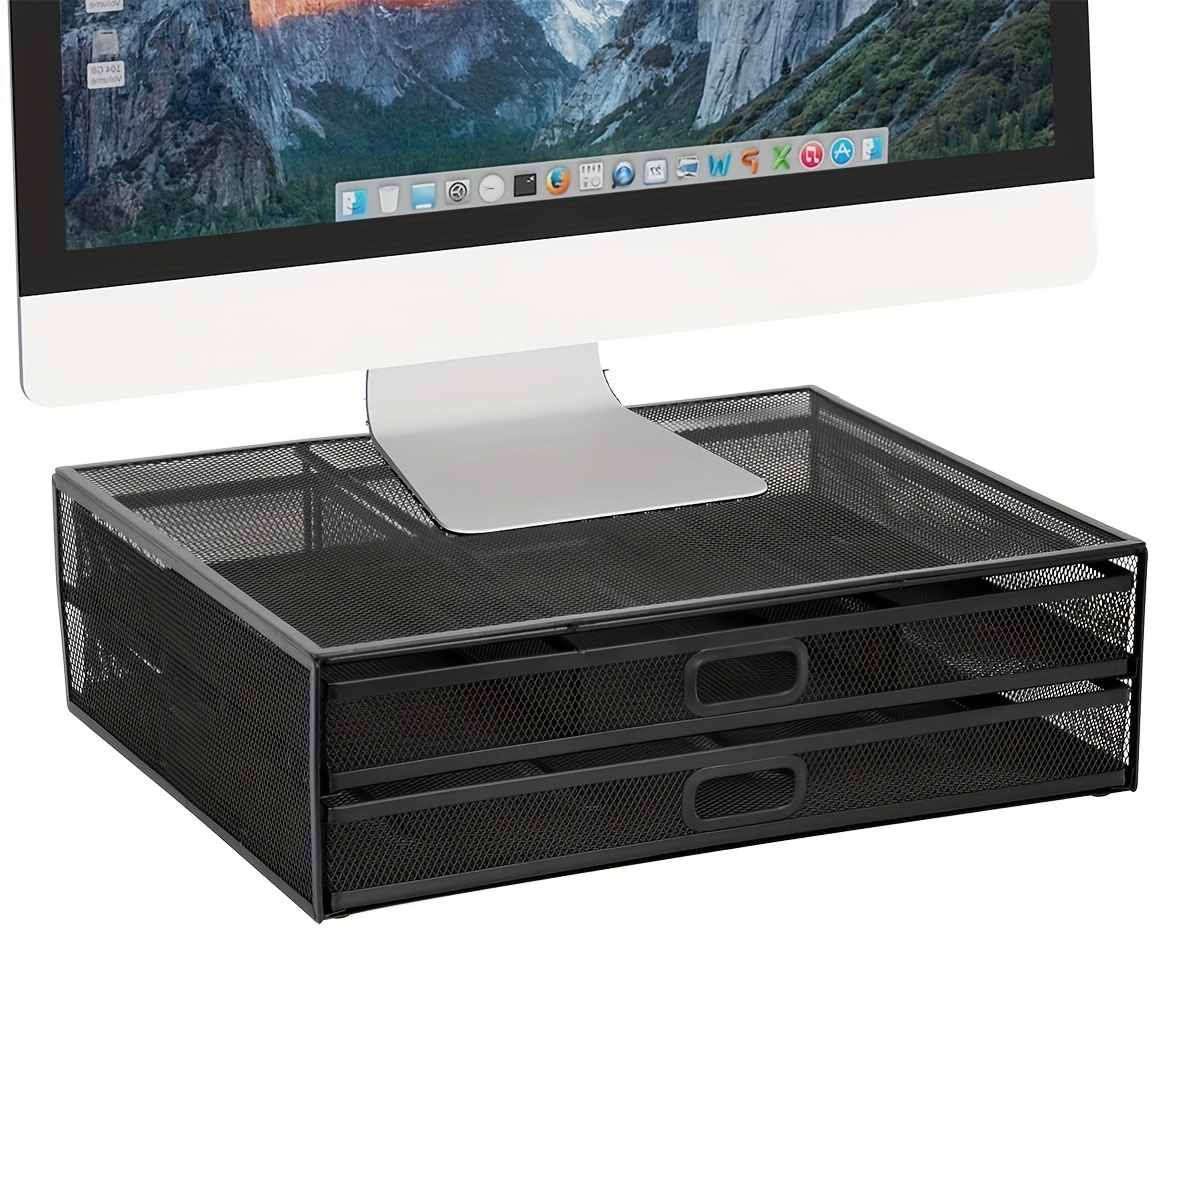 Printer Stand - Under Desk Printer Stand with Cable Management & Storage Drawers